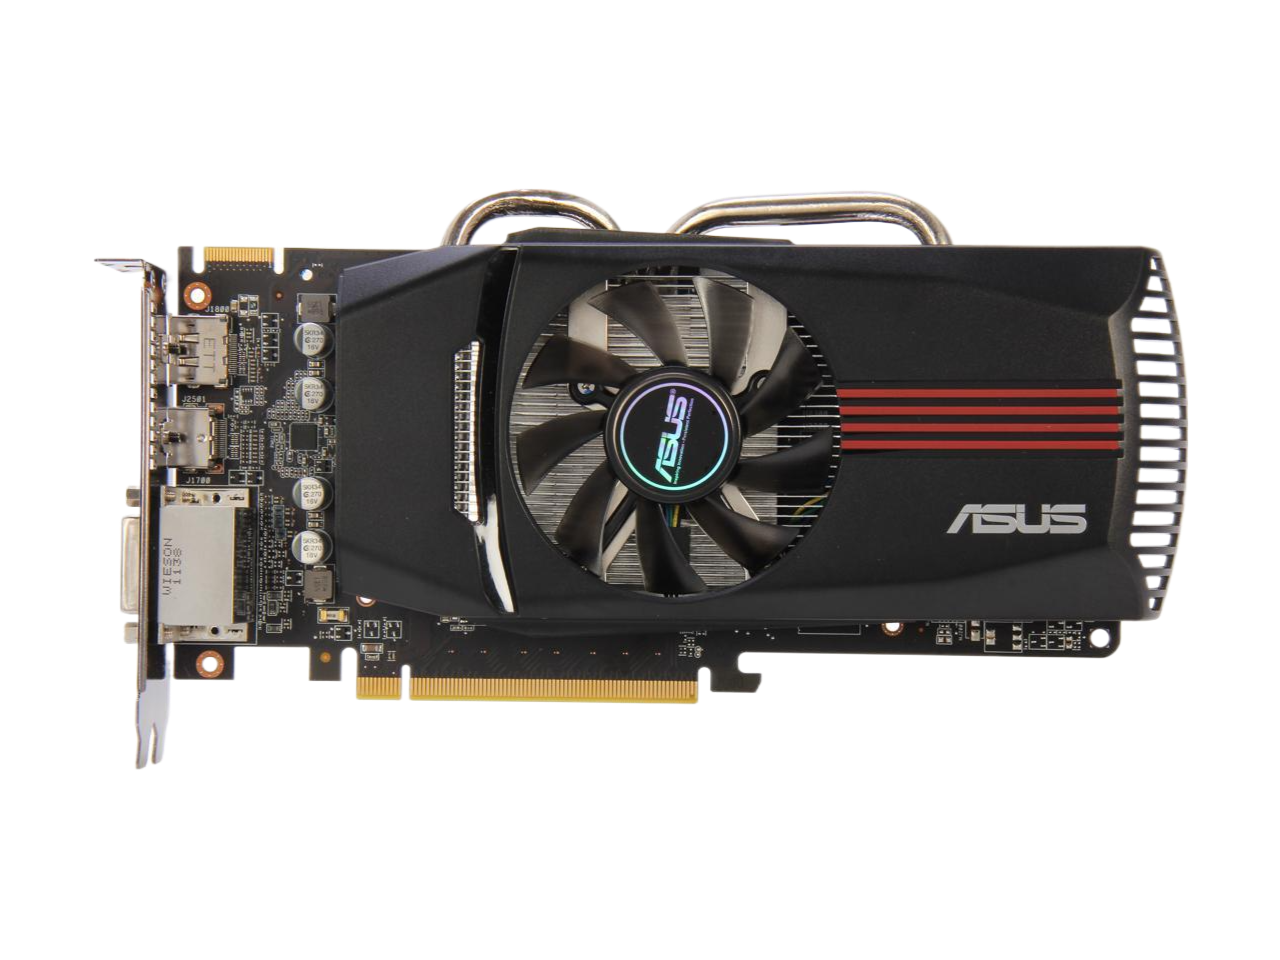 ASUS Radeon HD 6850 1GB GDDR5 PCI Express 2.1 x16 CrossFireX Support Video Card with Eyefinity EAH6850 DirectCU/2DIS/1GD5